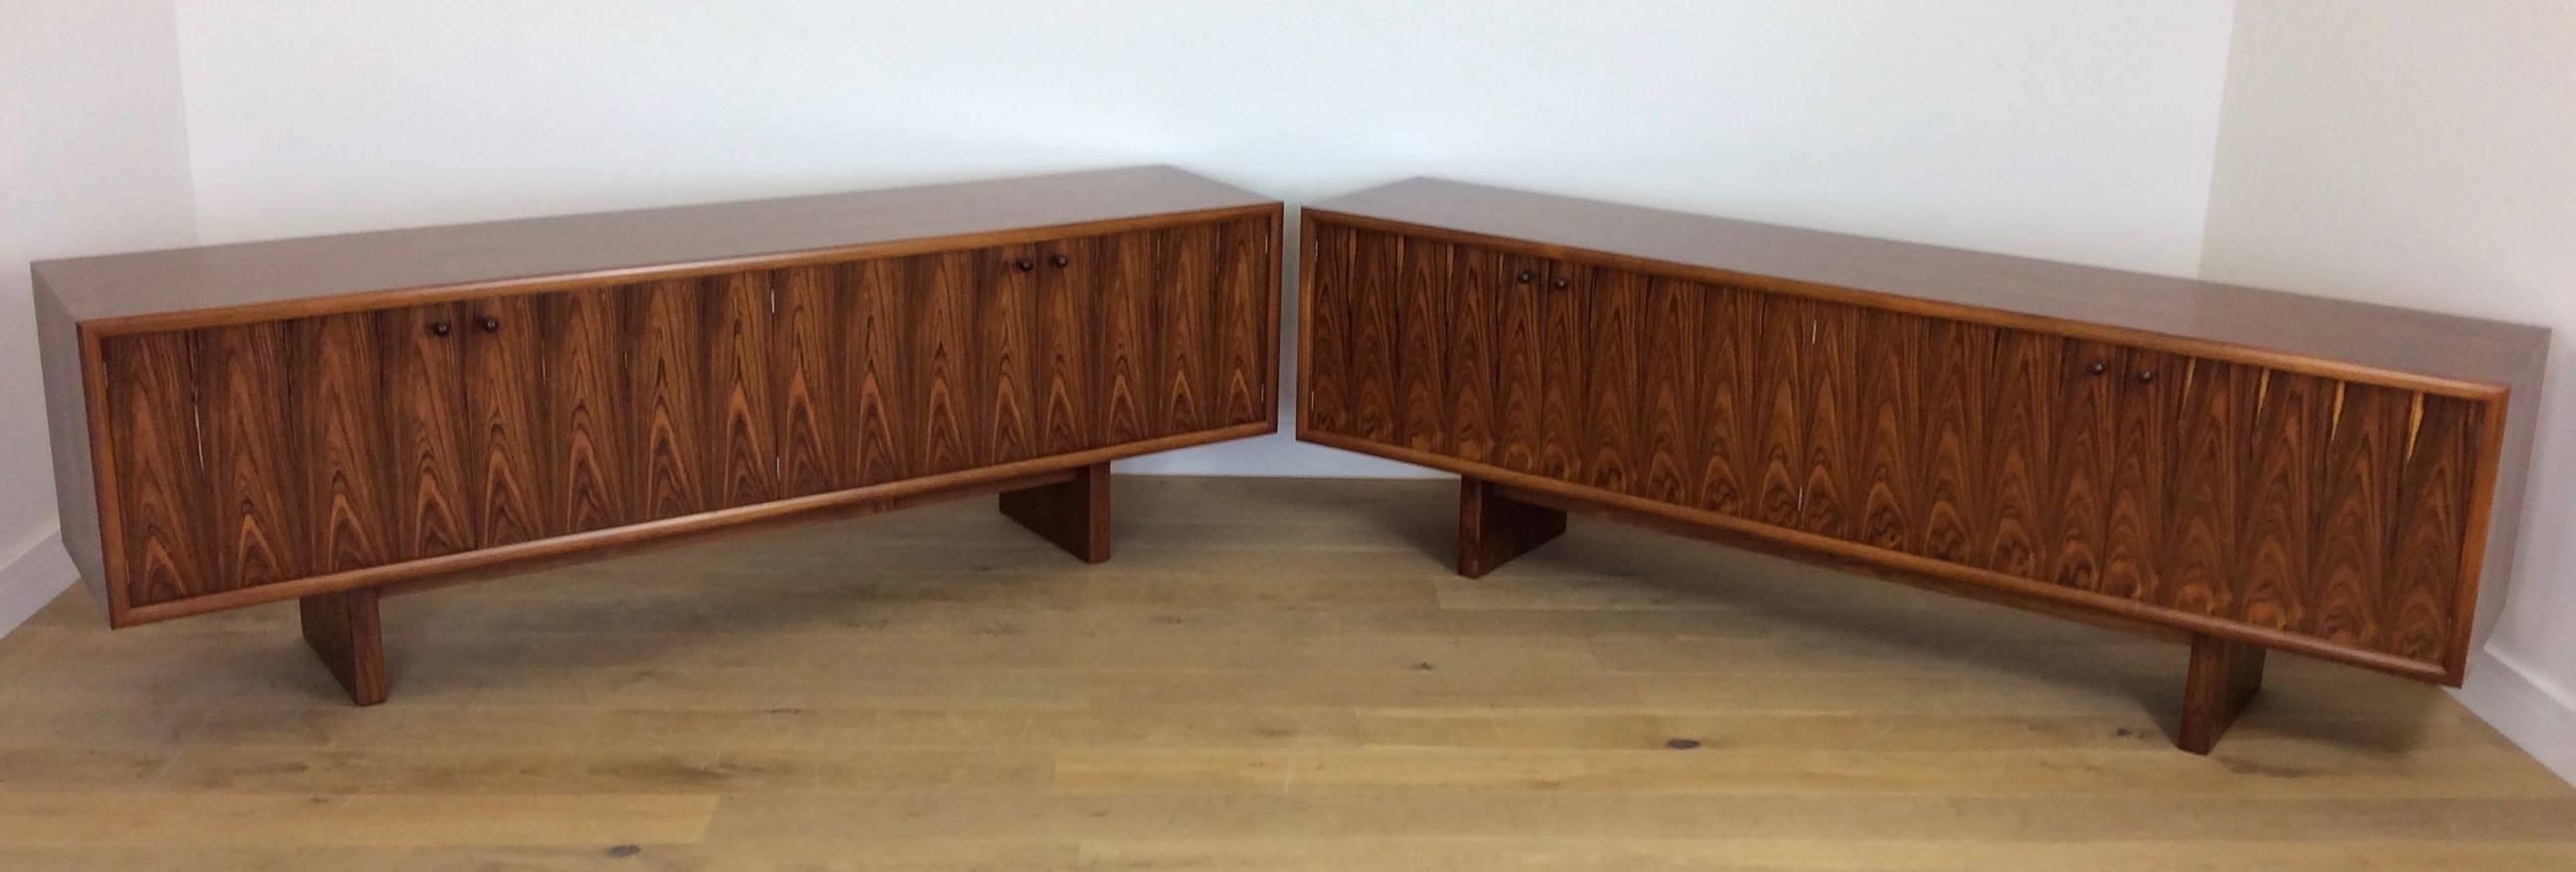 Midcentury Rosewood Sideboards Credenza Designed by Martin Hall 3